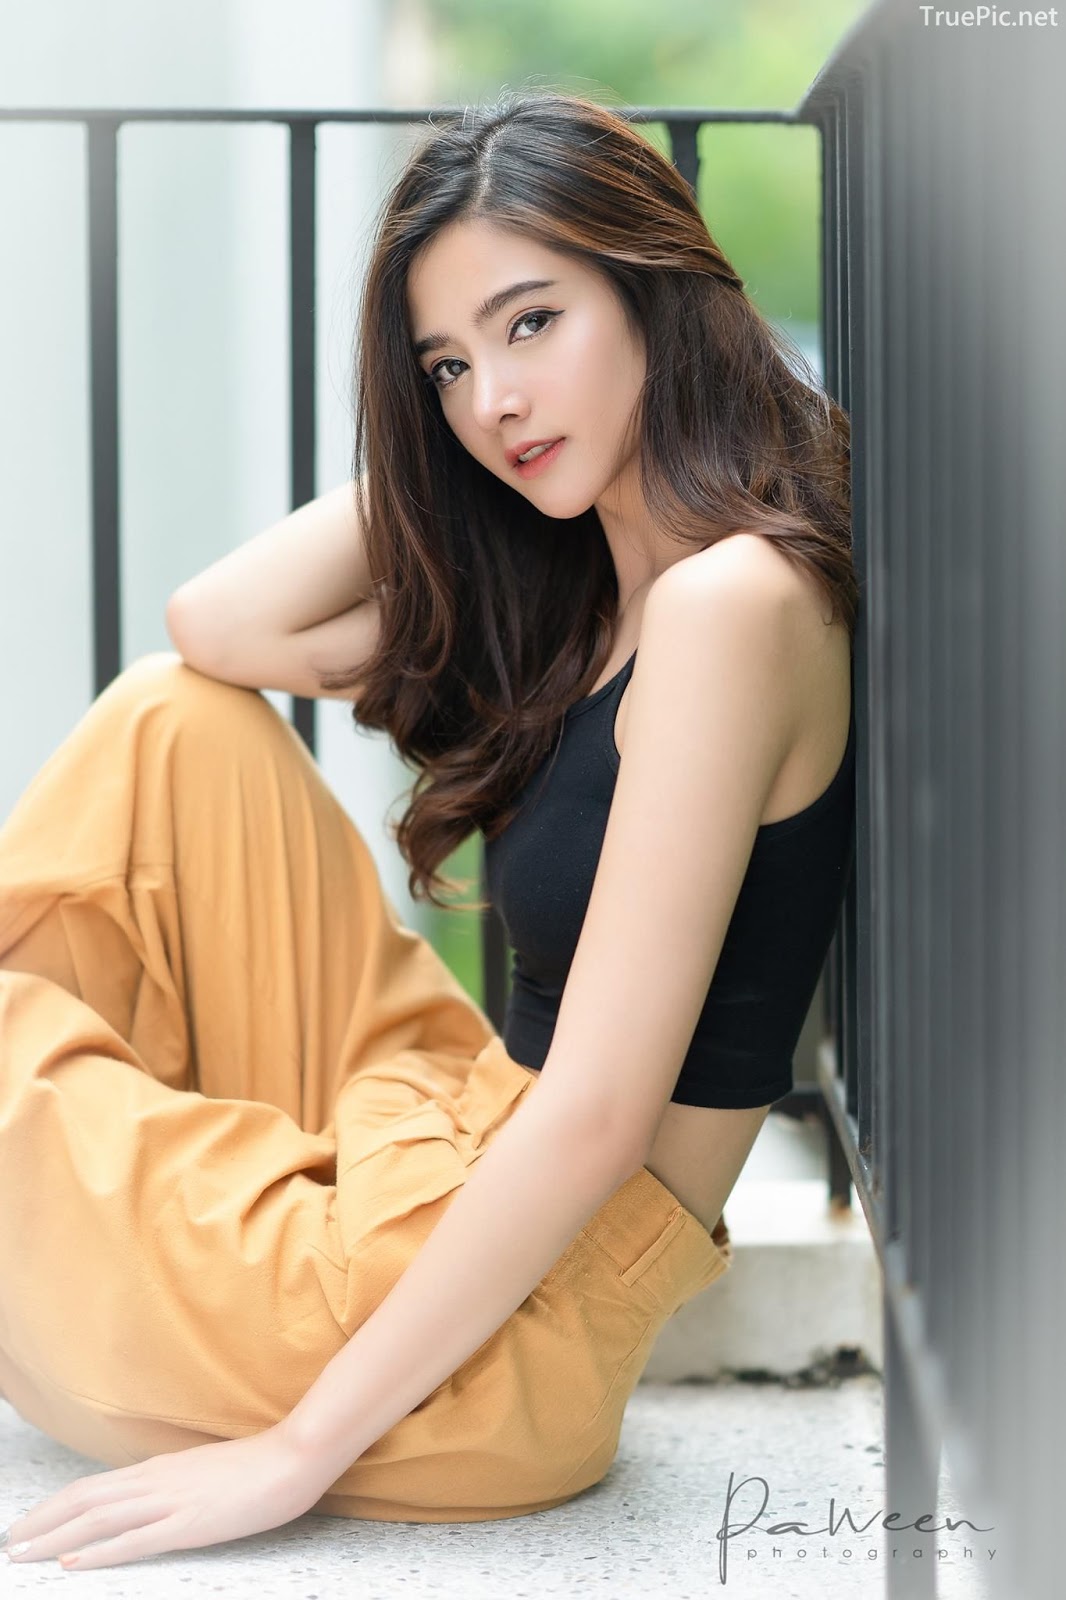 True Pic Thailand Pretty Girl Aintoaon Nantawong The Pure Beauty Of 